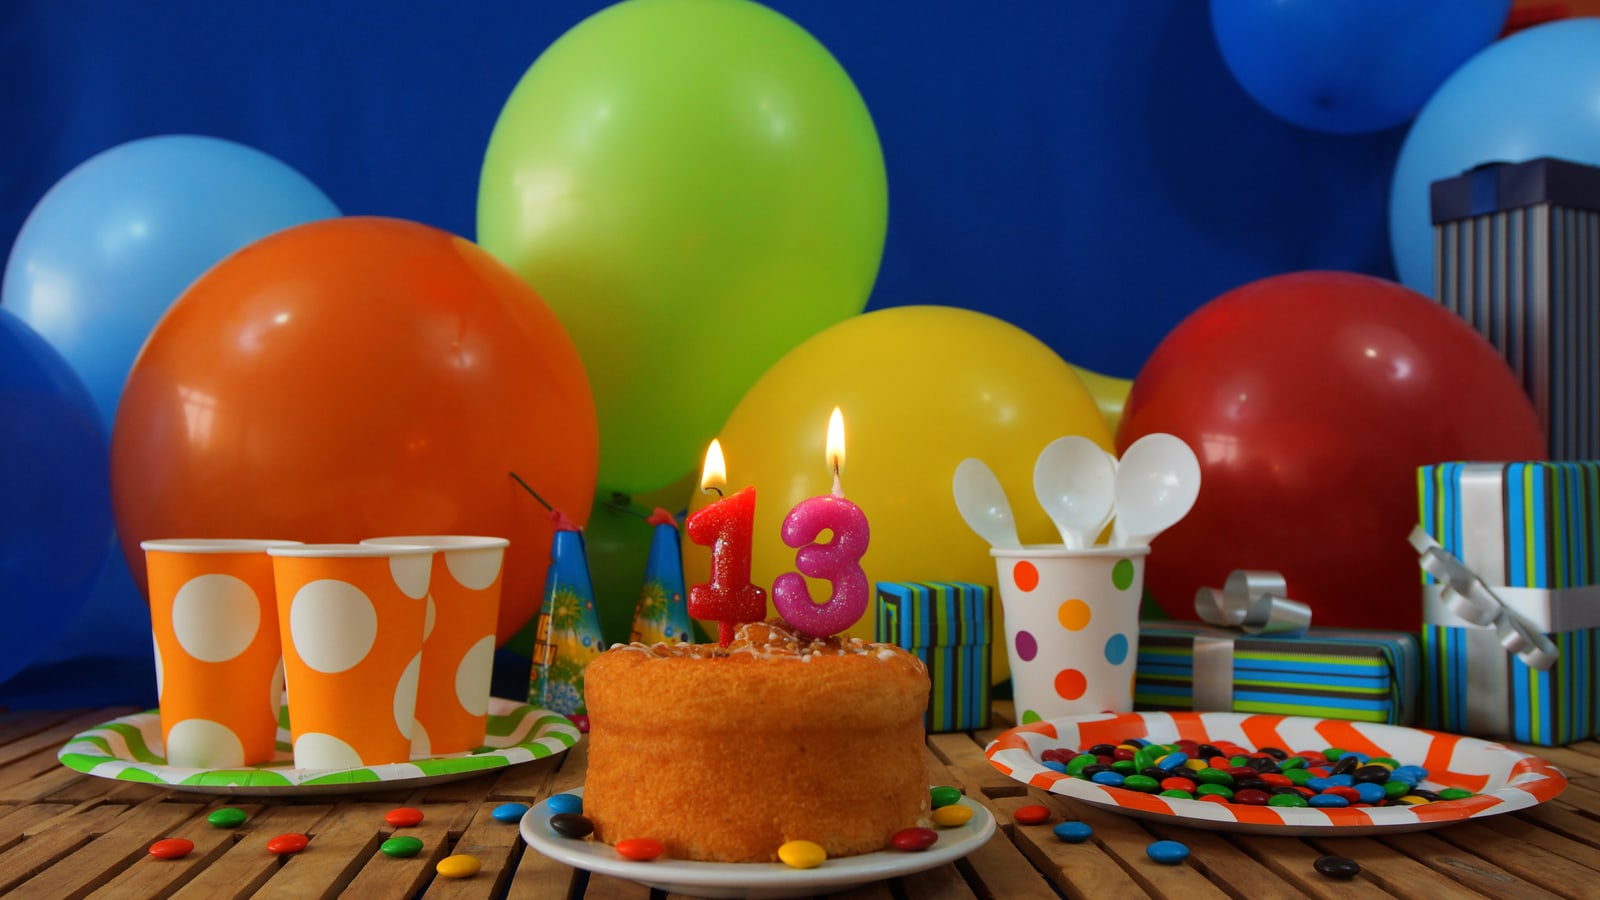 Unique Birthday Party Ideas for 13 Year Olds